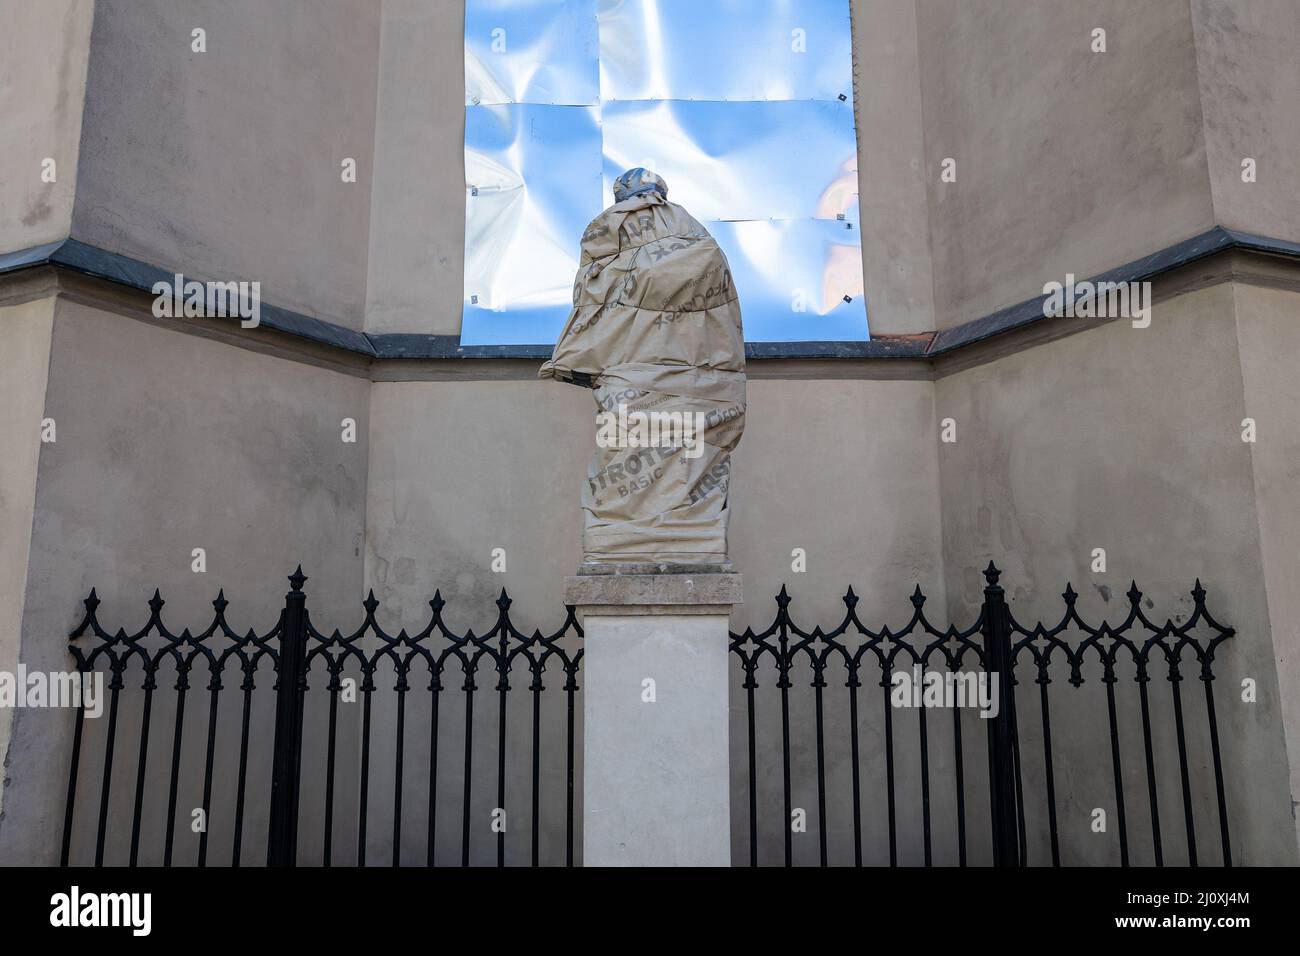 LVIV, UKRAINE - March 20, 2022:In order to protect them from damage, sculptures of the Saints of the Latin Cathedral are wrapped, and stained glass wi Stock Photo